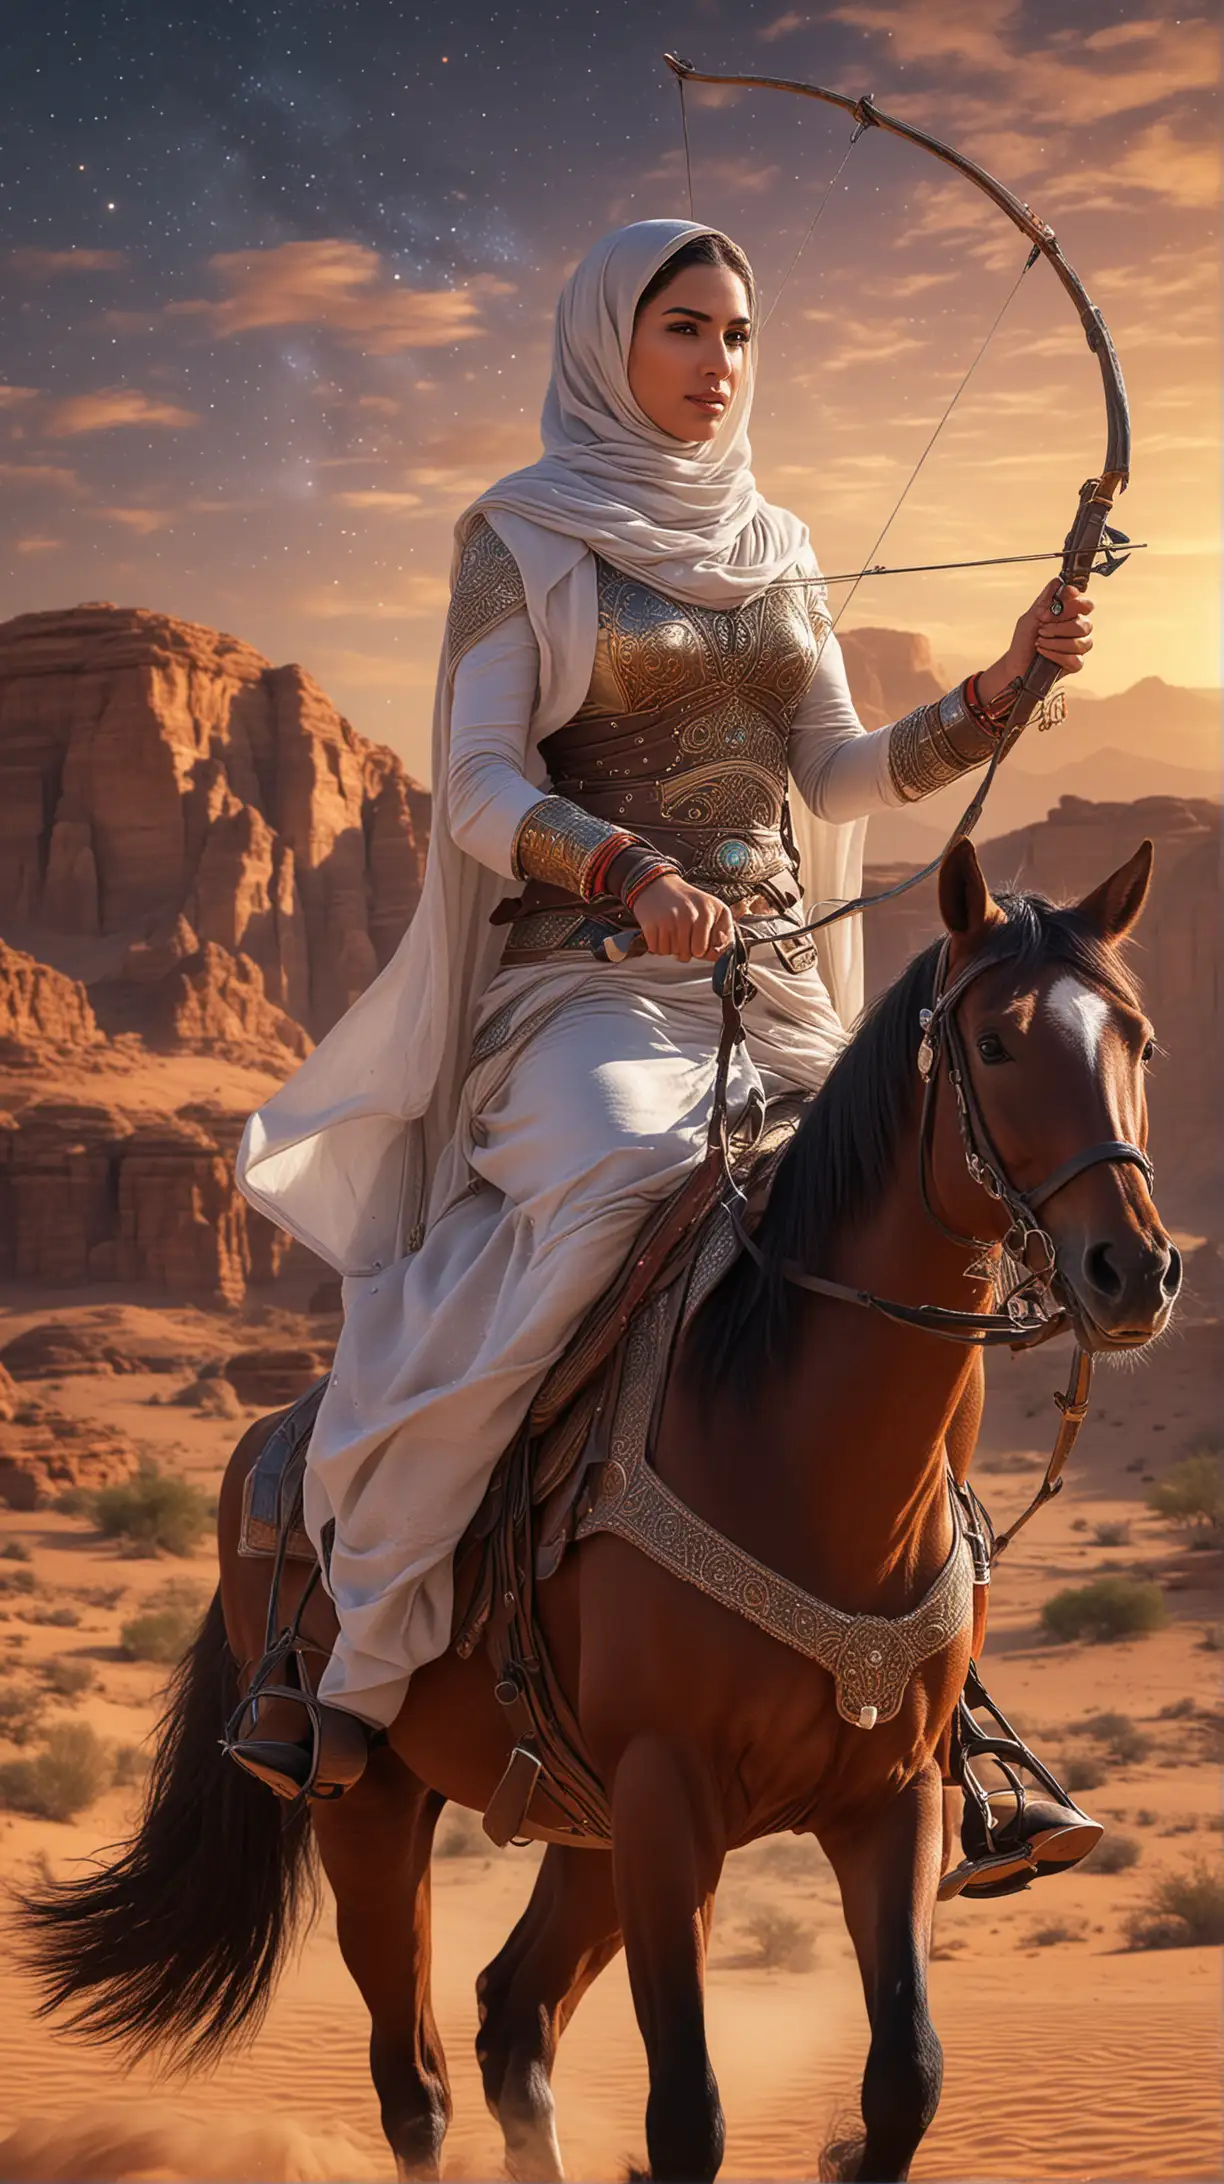 Arabic Woman Riding Horse with Archery in Majestic Desert Landscape